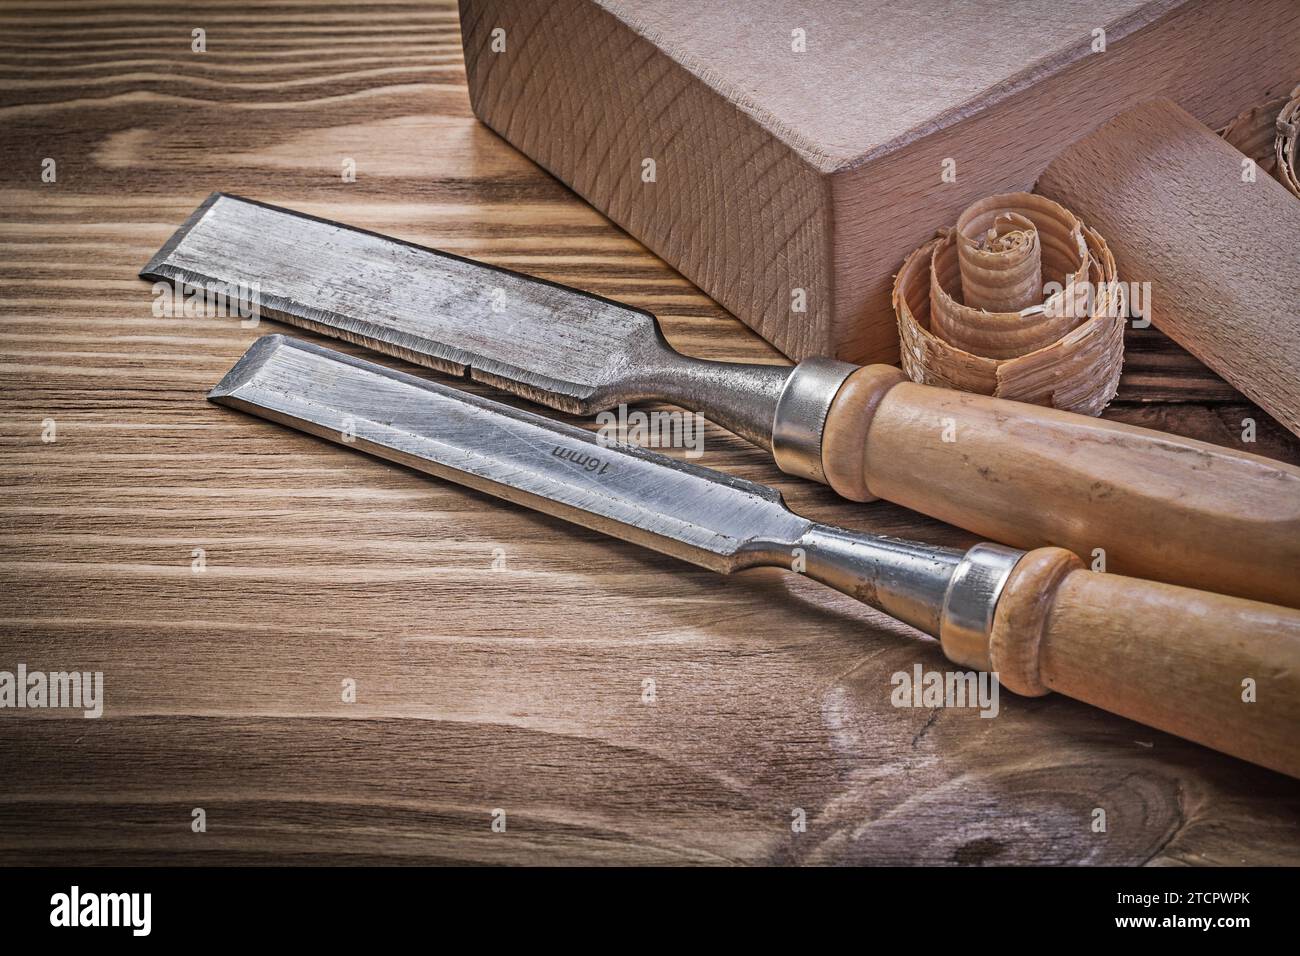 Lump hammer chisel curled scobs on vintage wooden board building concept Stock Photo